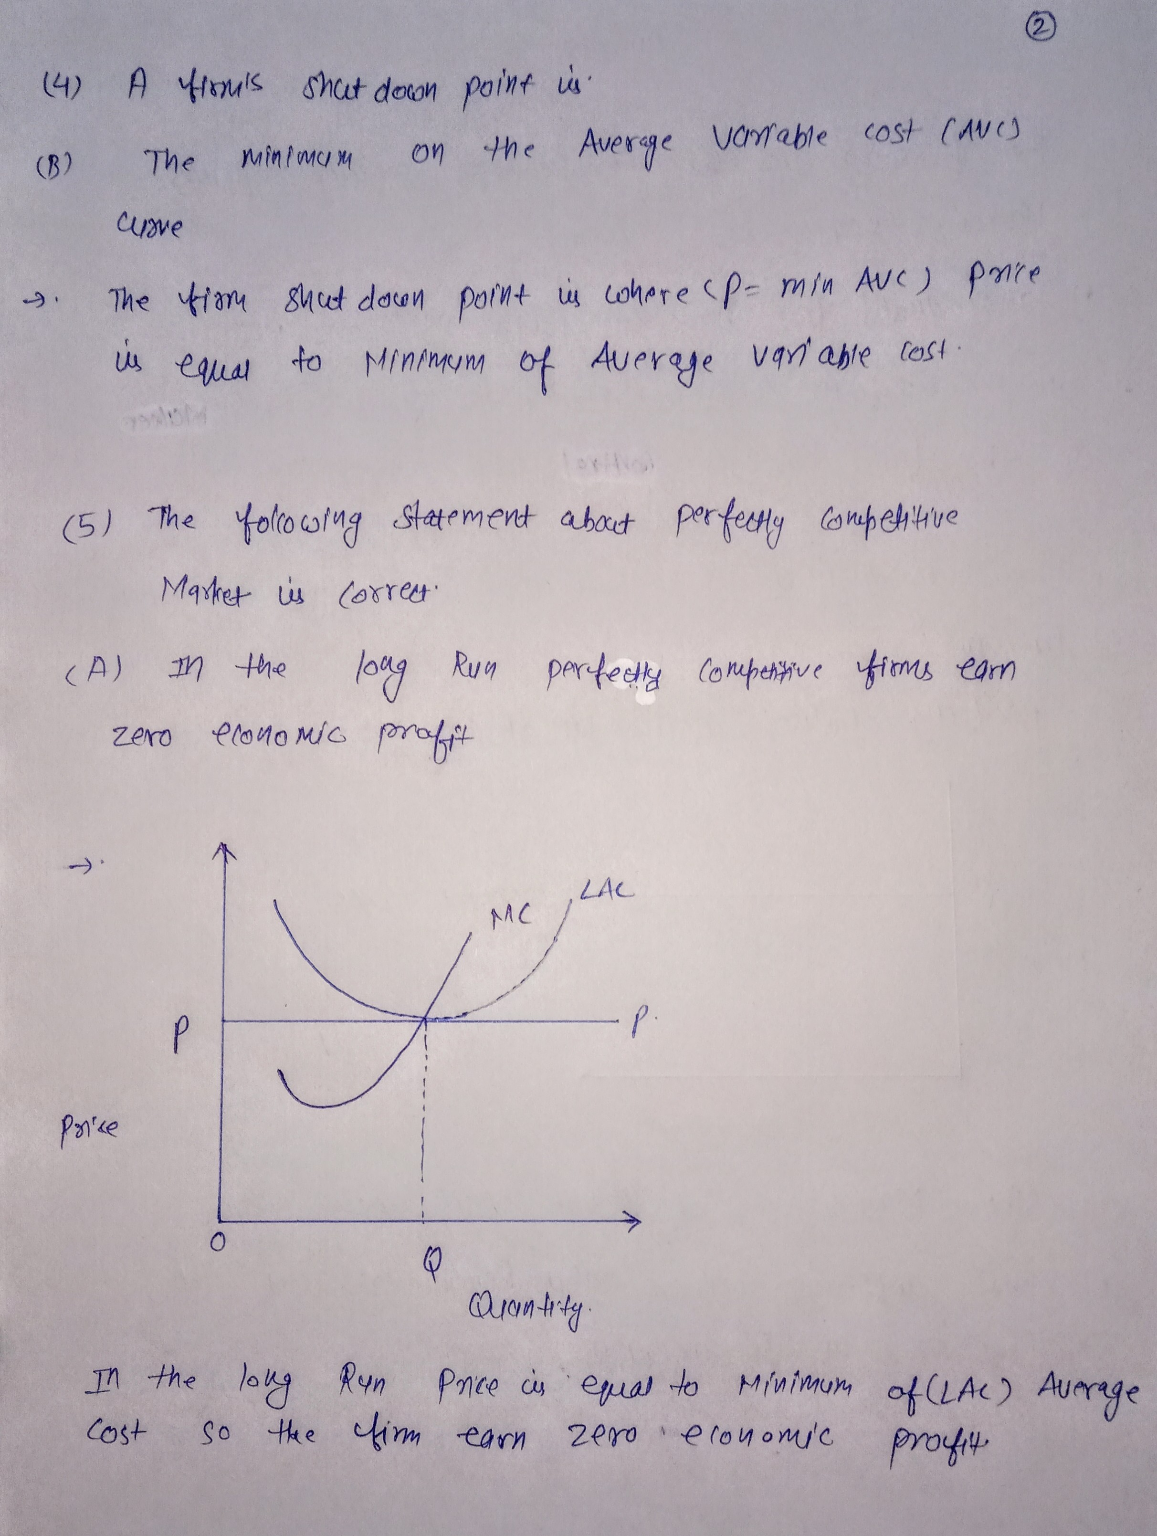 1. All of the following are characteristics of perfectly
competitive markets, except:
A: No barriers to entry or exit (fully
mobile)
B: Large number of buyers & sellers
C: A homogeneous product (not
differentiated)
D: Individual firms have the power to control
price. 
2. The individual firms demand curve (as compared to
the market demand curve) in a perfectly competitive market
is:
A: Perfectly inelastic (vertical)
B: Downward sloping, but inside of the market
demand curve.
C: Perfectly elastic (horizontal at the market
price)
D: Identical to the market demand curve. 
3. The maximization of profit occurs where:
A: Total costs reaches a minimum.
B: The price is as high as the demand will
allow.
C: Total revenues reaches a maximum.
D: The difference between total revenues (TR)
and total costs (TC) is the greatest.
4: A firms shutdown point is:
A: The minimum on the marginal cost curve
(MC).
B: The minimum on the average variable cost
(AVC) curve.
C: The minimum on the average total cost curve
(ATC).
D: When demand equals zero.
5. Which of the following statements about perfectly
competitive markets is correct?
A. In the long run, perfectly competitive firms
earn zero economic profit.
B. In the long run, perfectly competitive firms
can earn profits, losses or break-even.
C. In the short run, firms will never choose to
shut down.
D. In the short run, perfectly competitive
firms will never earn a profit.